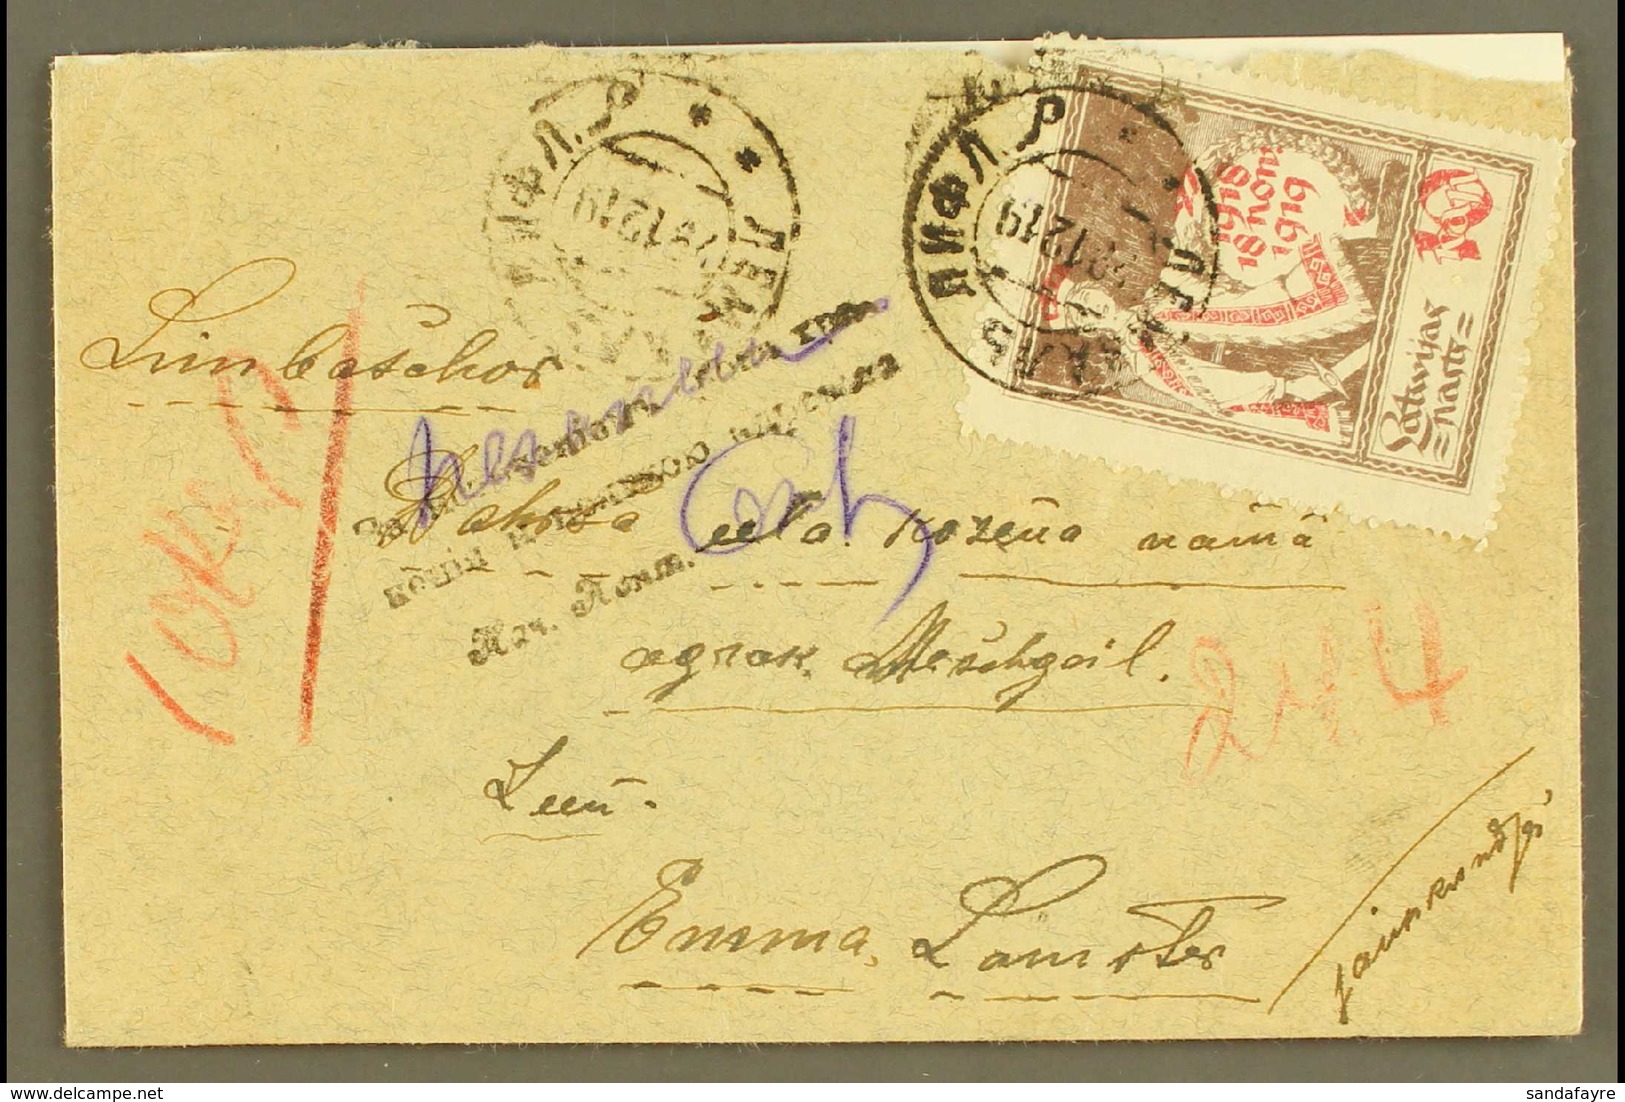 1919 (22 Dec) Env From Lemsal With Some Flap / Opening Faults Bearing 10k Carmine And Brown First Anniversary Stamp, A S - Latvia